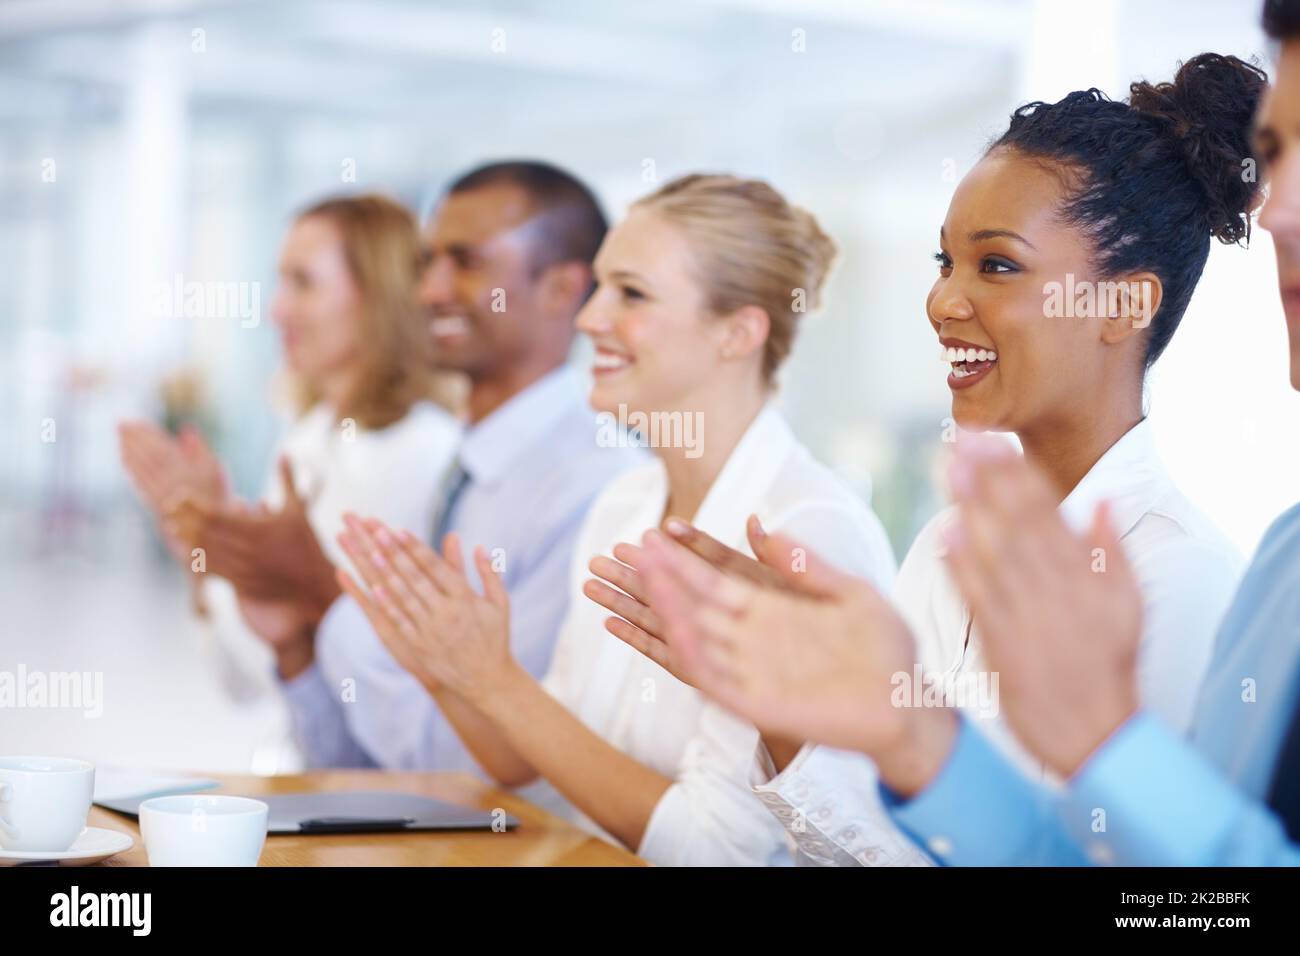 Business people applauding. Portrait of multi ethnic business people applauding during presentation. Stock Photo